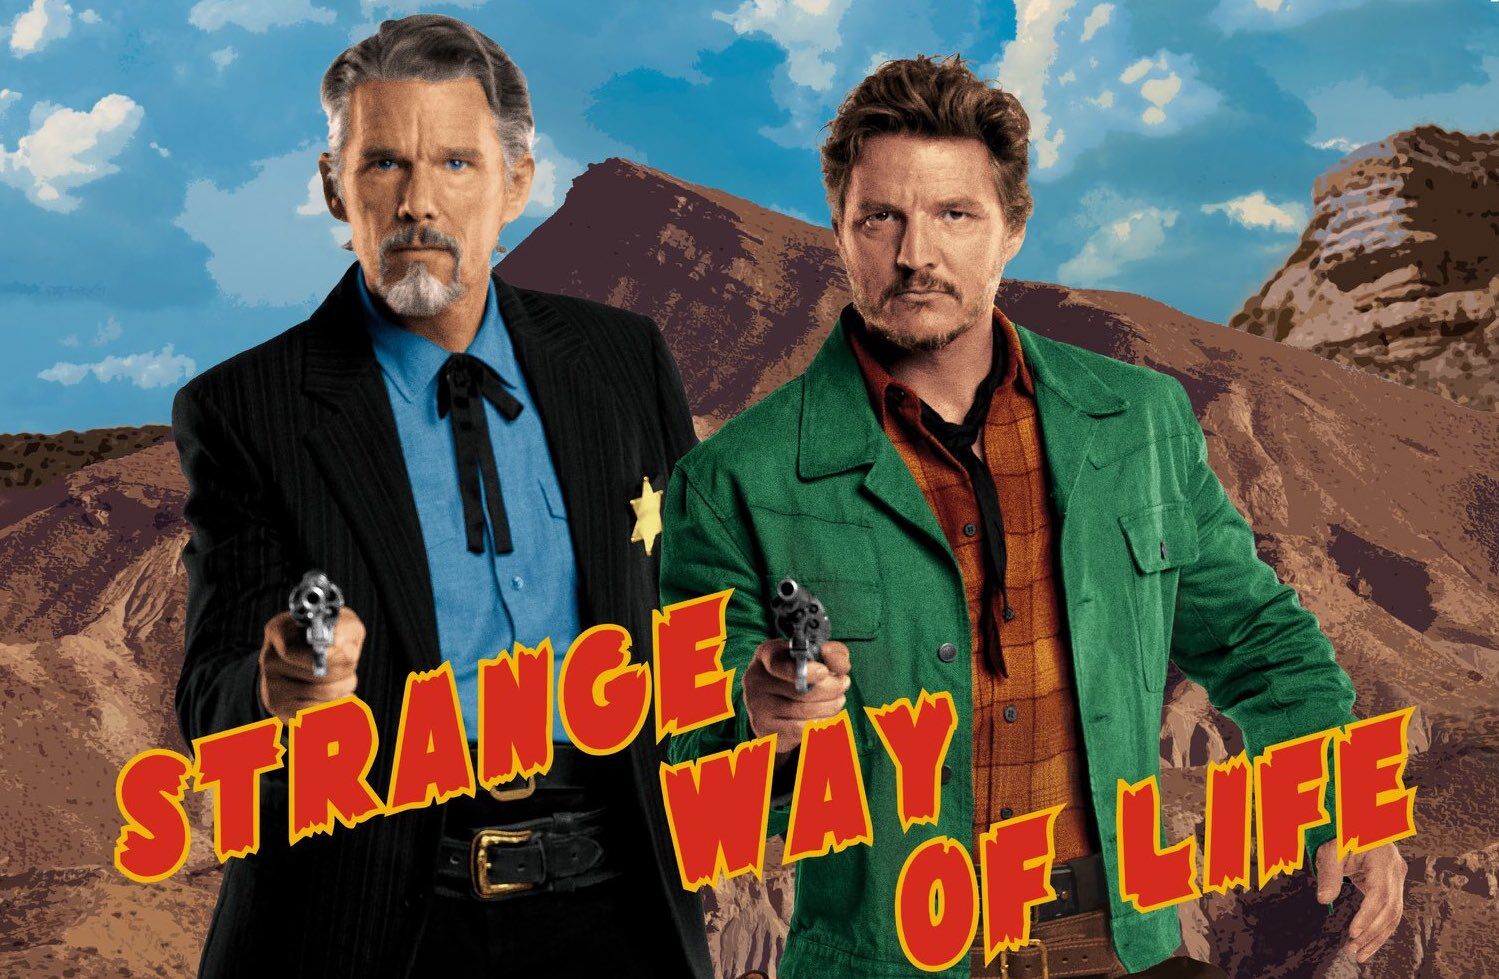 Ethan Hawke and Pedro Pascal in the poster for Strange Way of Life